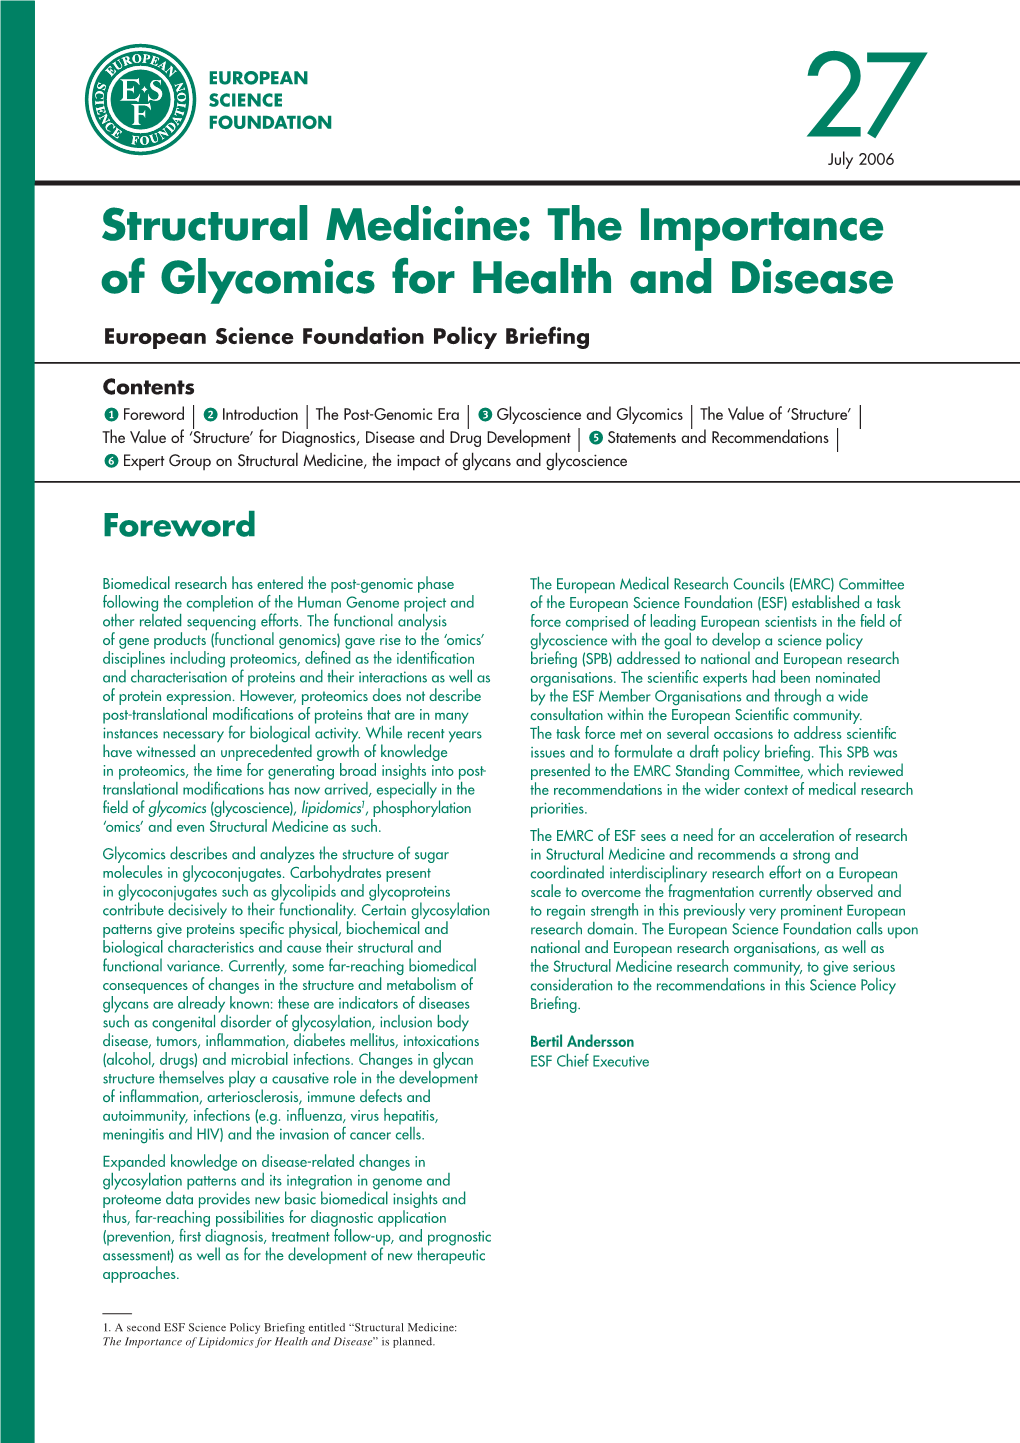 Structural Medicine: the Importance of Glycomics for Health and Disease